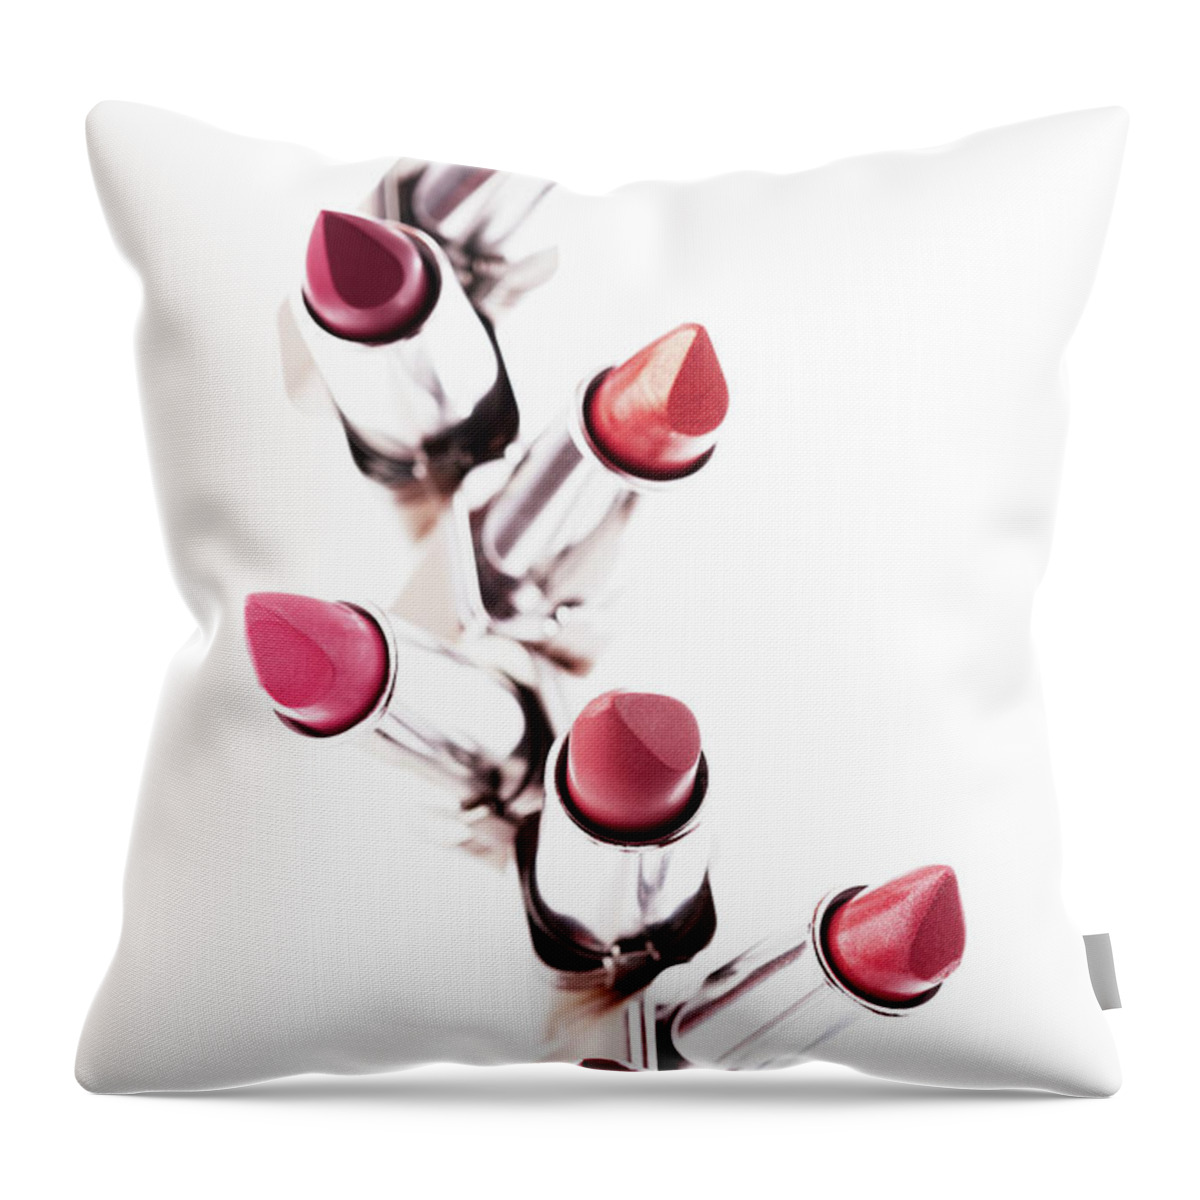 White Background Throw Pillow featuring the photograph Assortment Of Coloured Lipsticks by Martin Poole